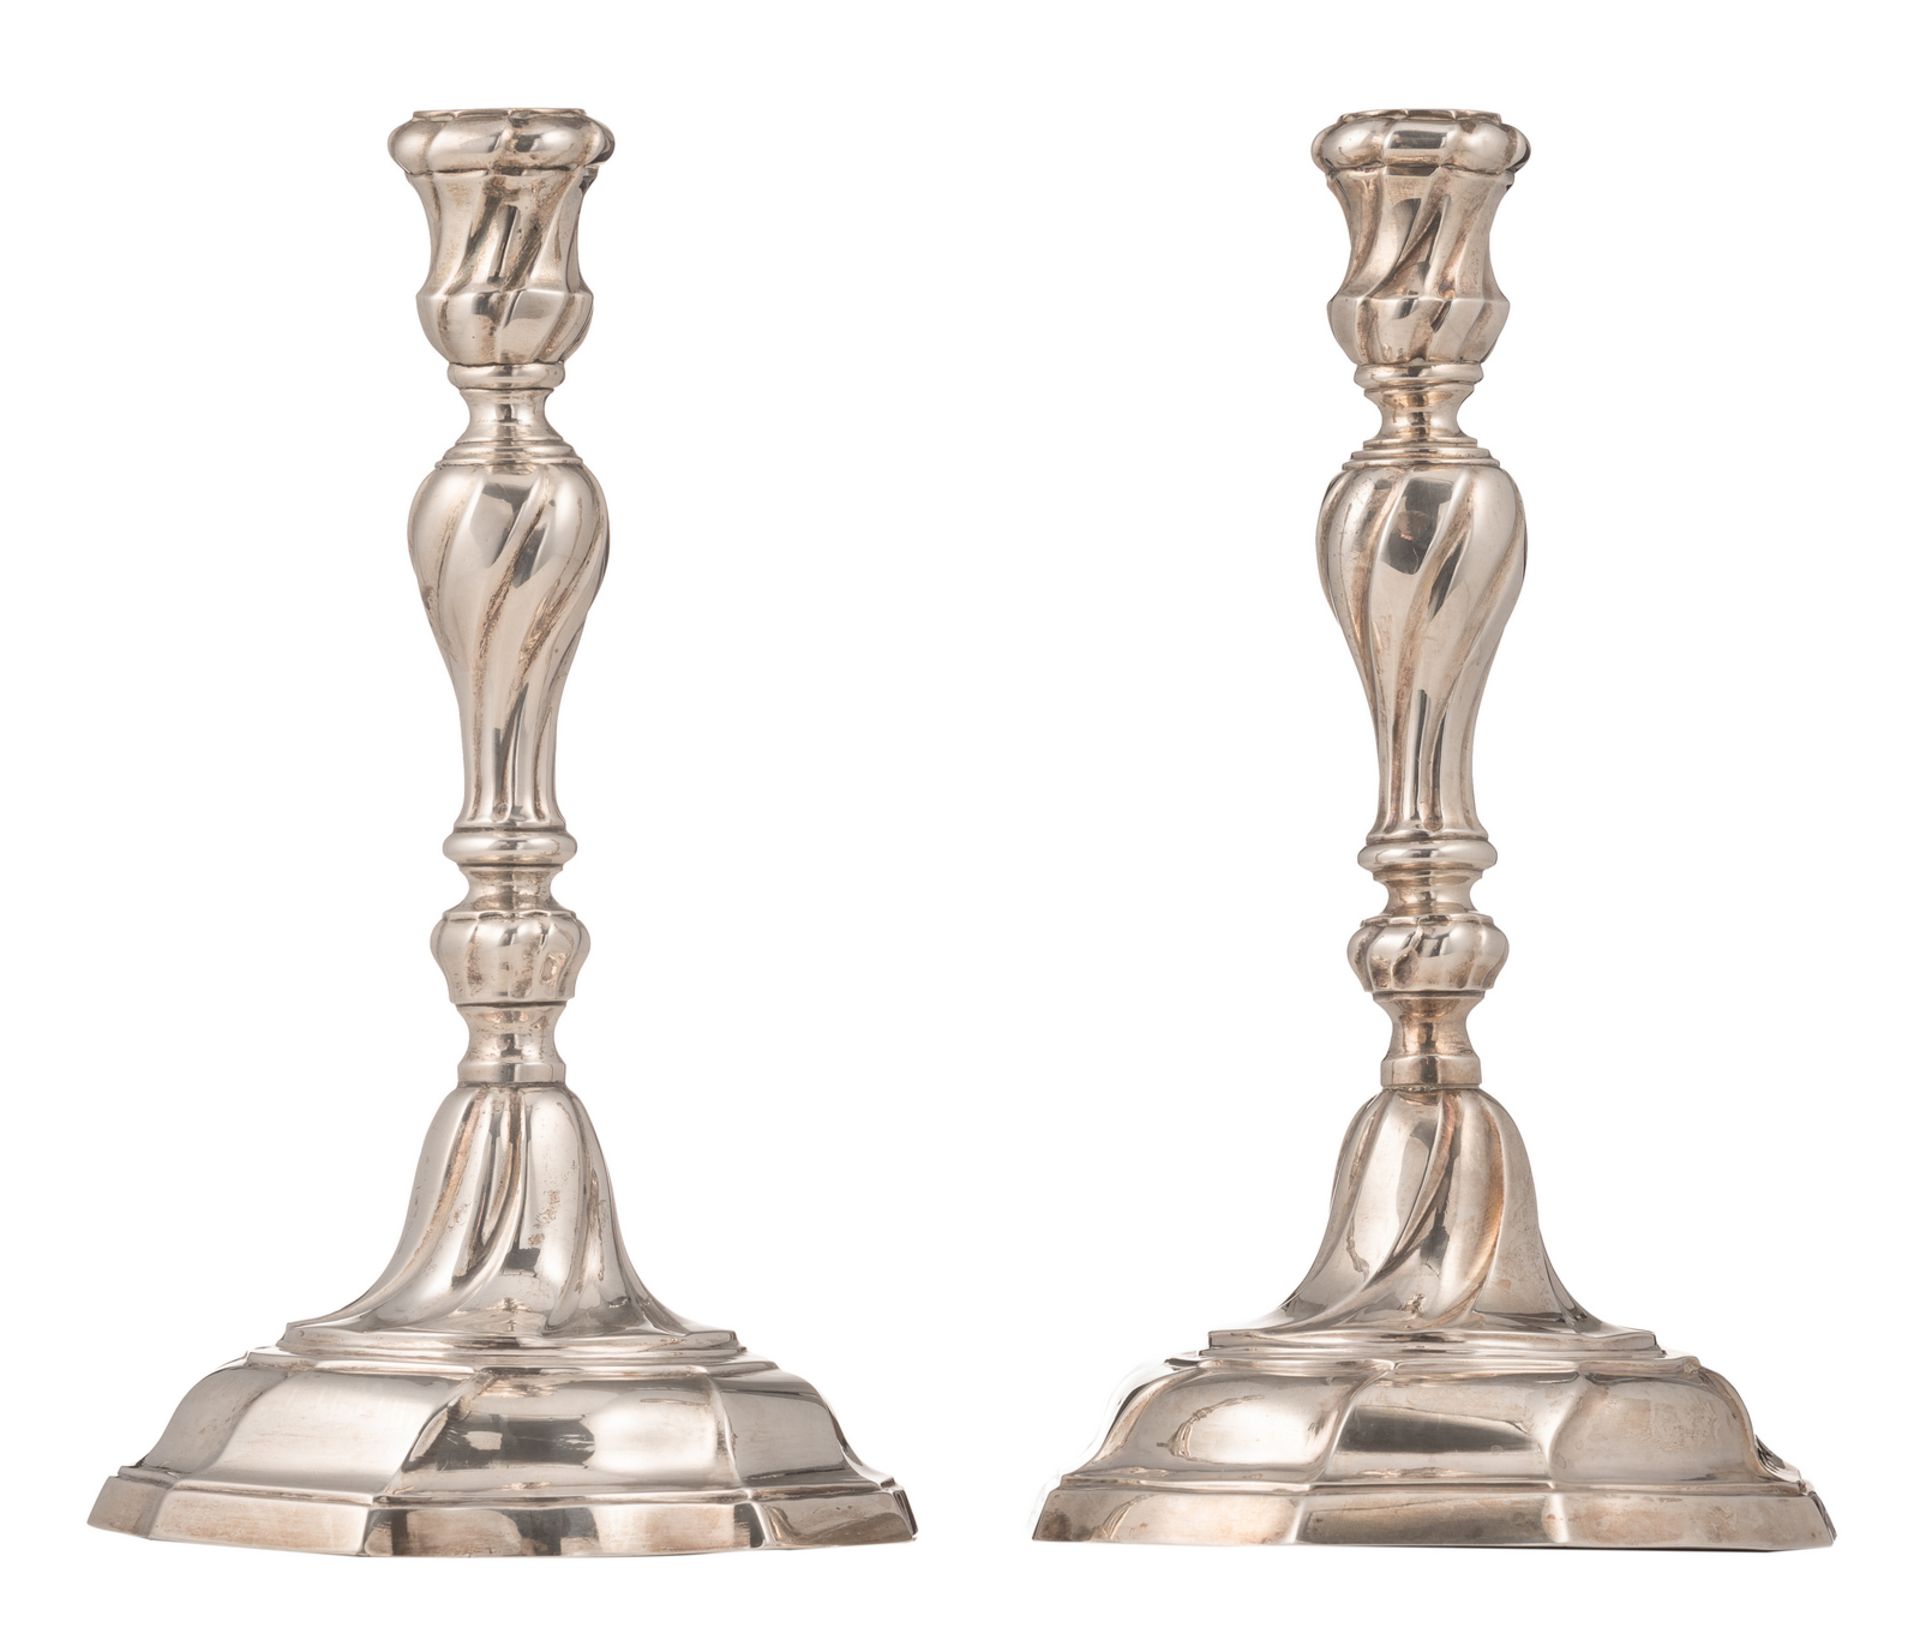 A pair of silver rococo candlesticks, Ghent hallmark, date letter (17)75, maker's mark J.B. Ms